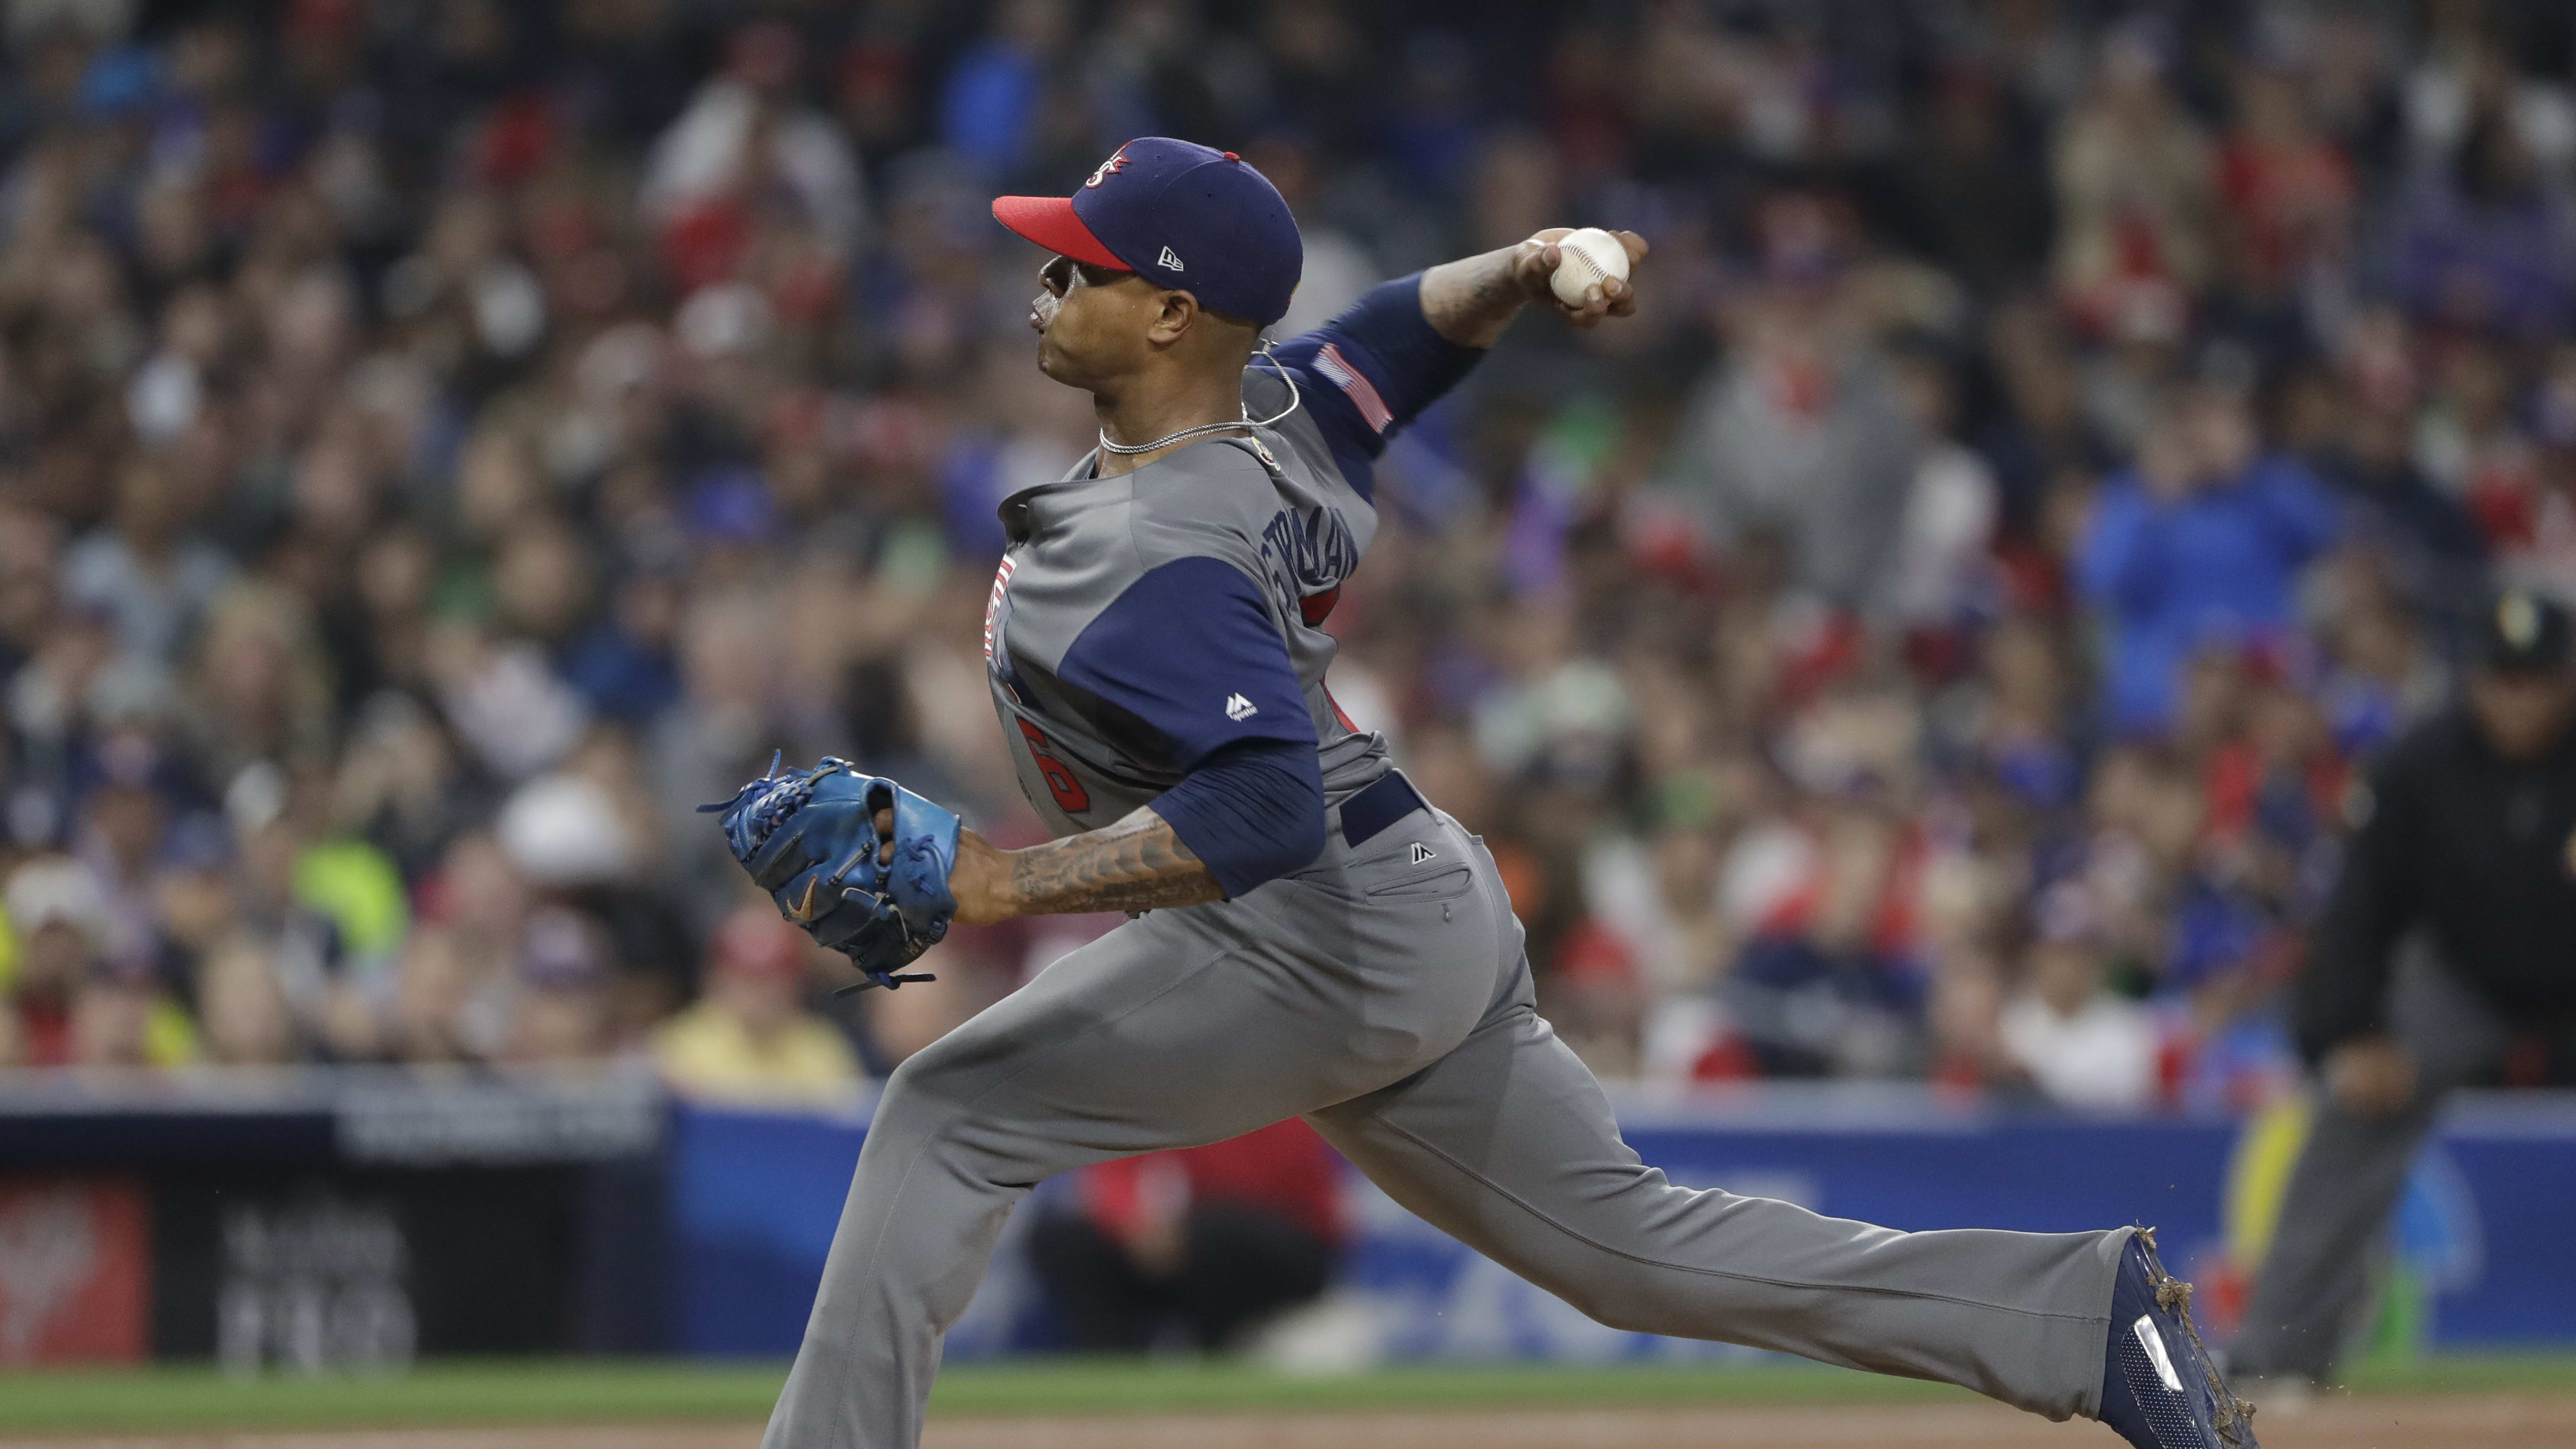 Williams' changeup helps USA to WBC quarters.